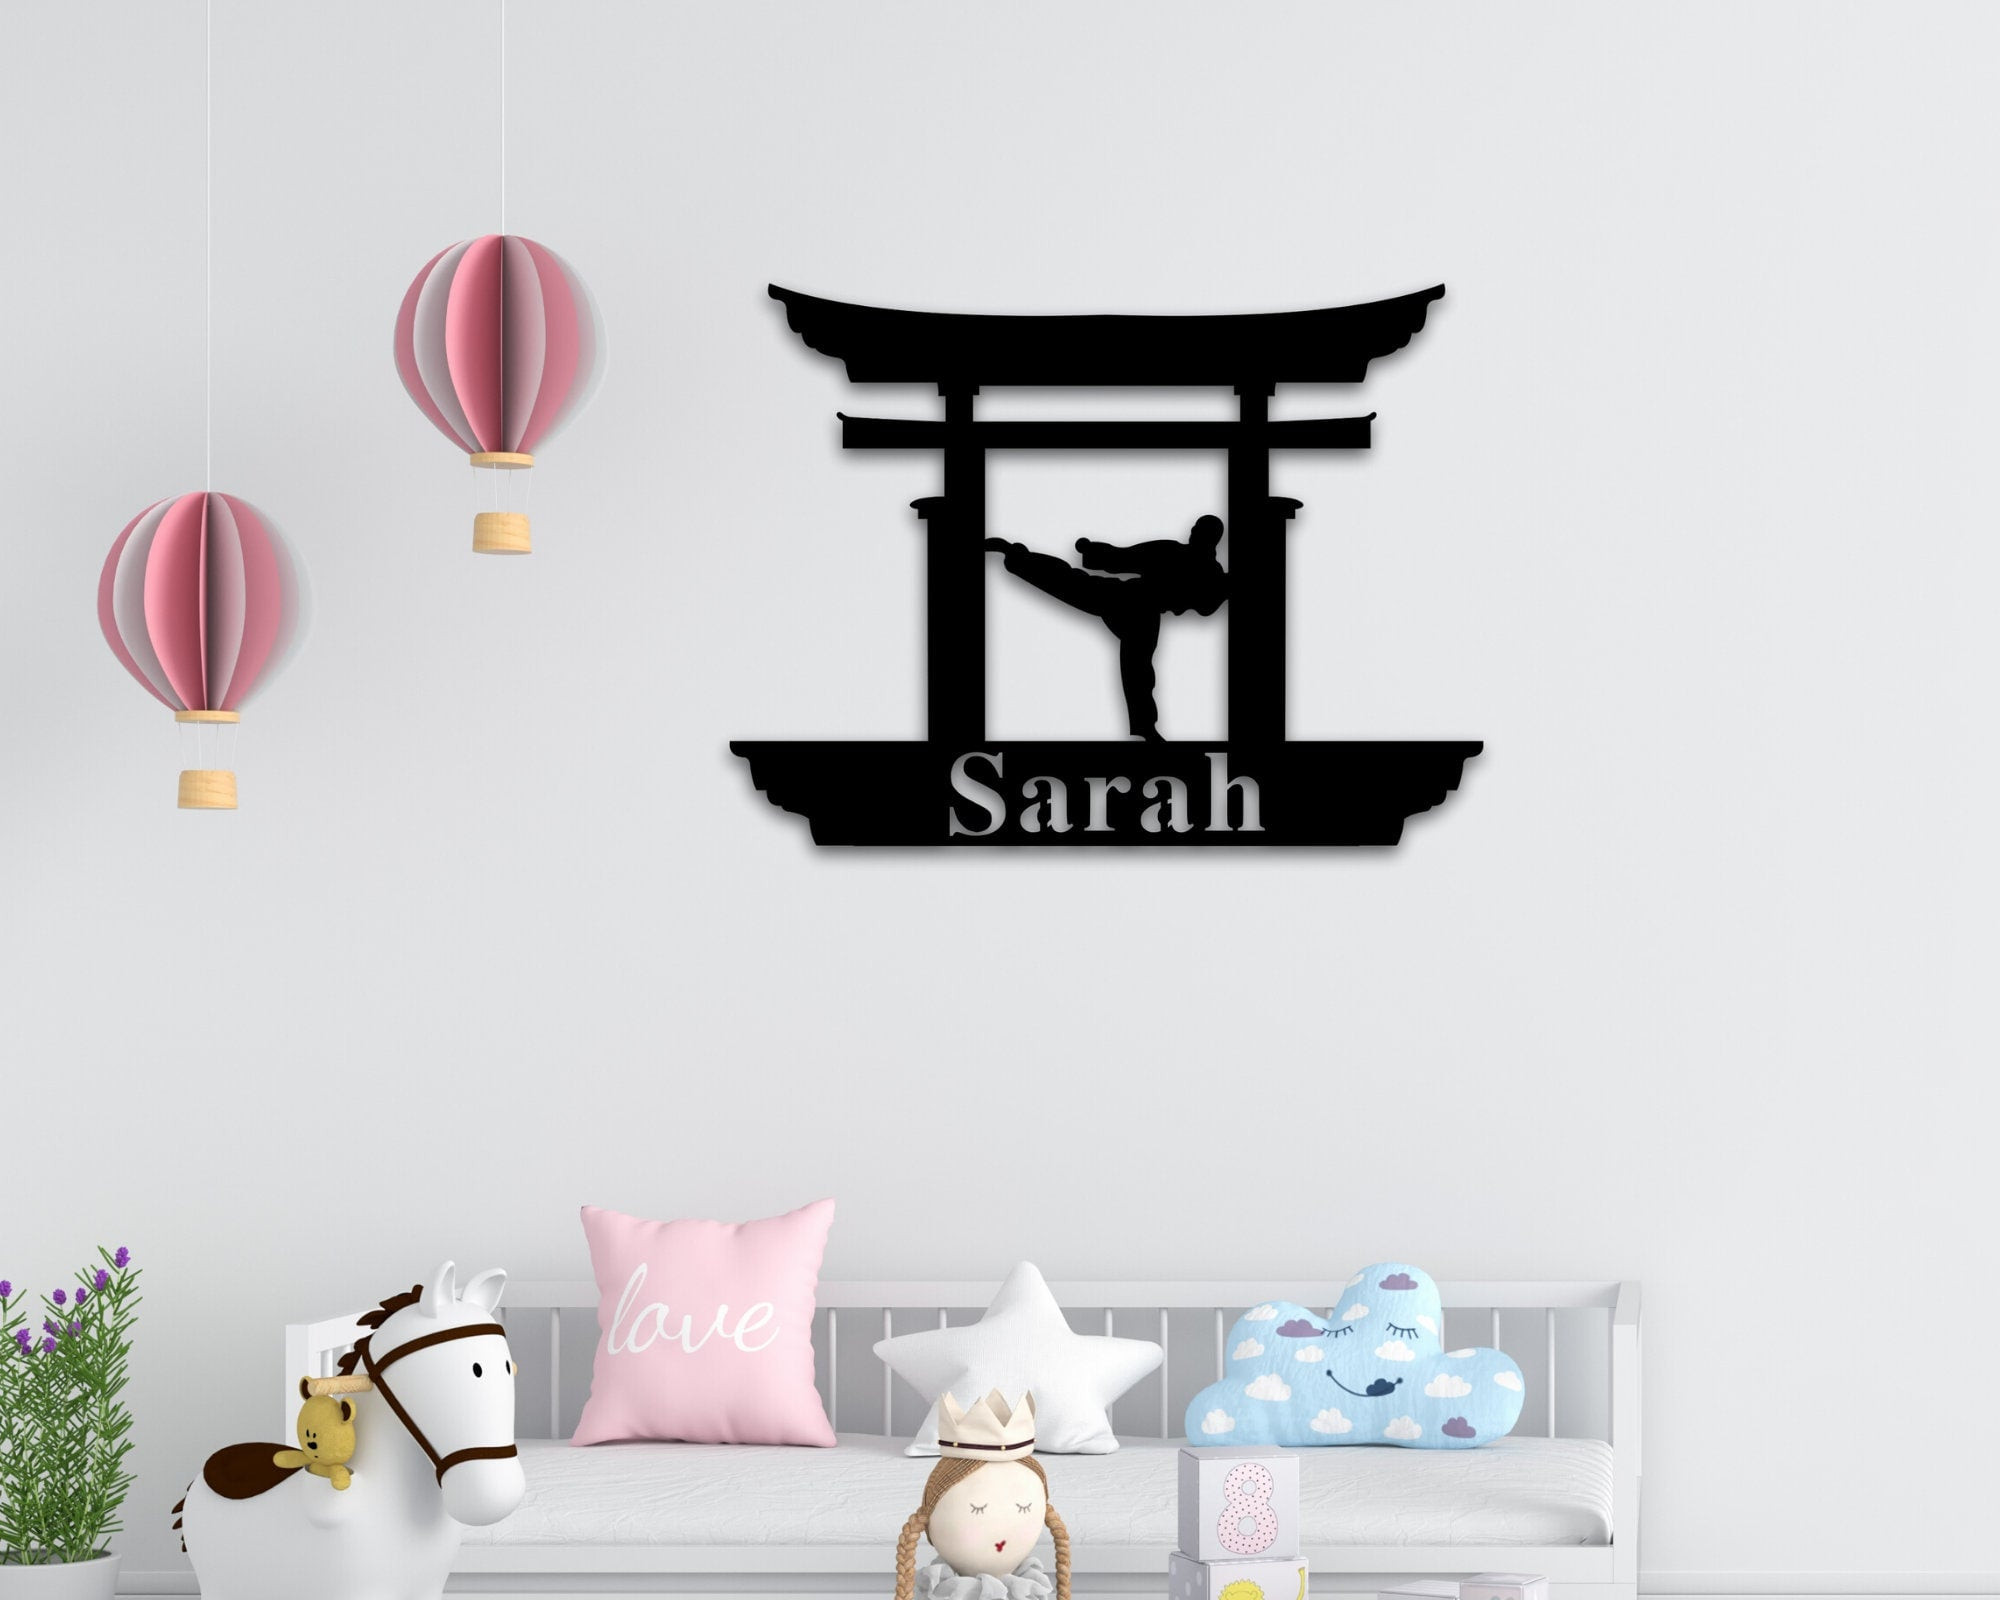 Custom Name Sign, Personalized Karate Name Sign, Personalized Metal Name Sign, Karate Wall Hanger, Nursery Decor, Sport Home Decor Gift Idea, Metal Laser Cut Metal Signs Custom Gift Ideas 14x14IN